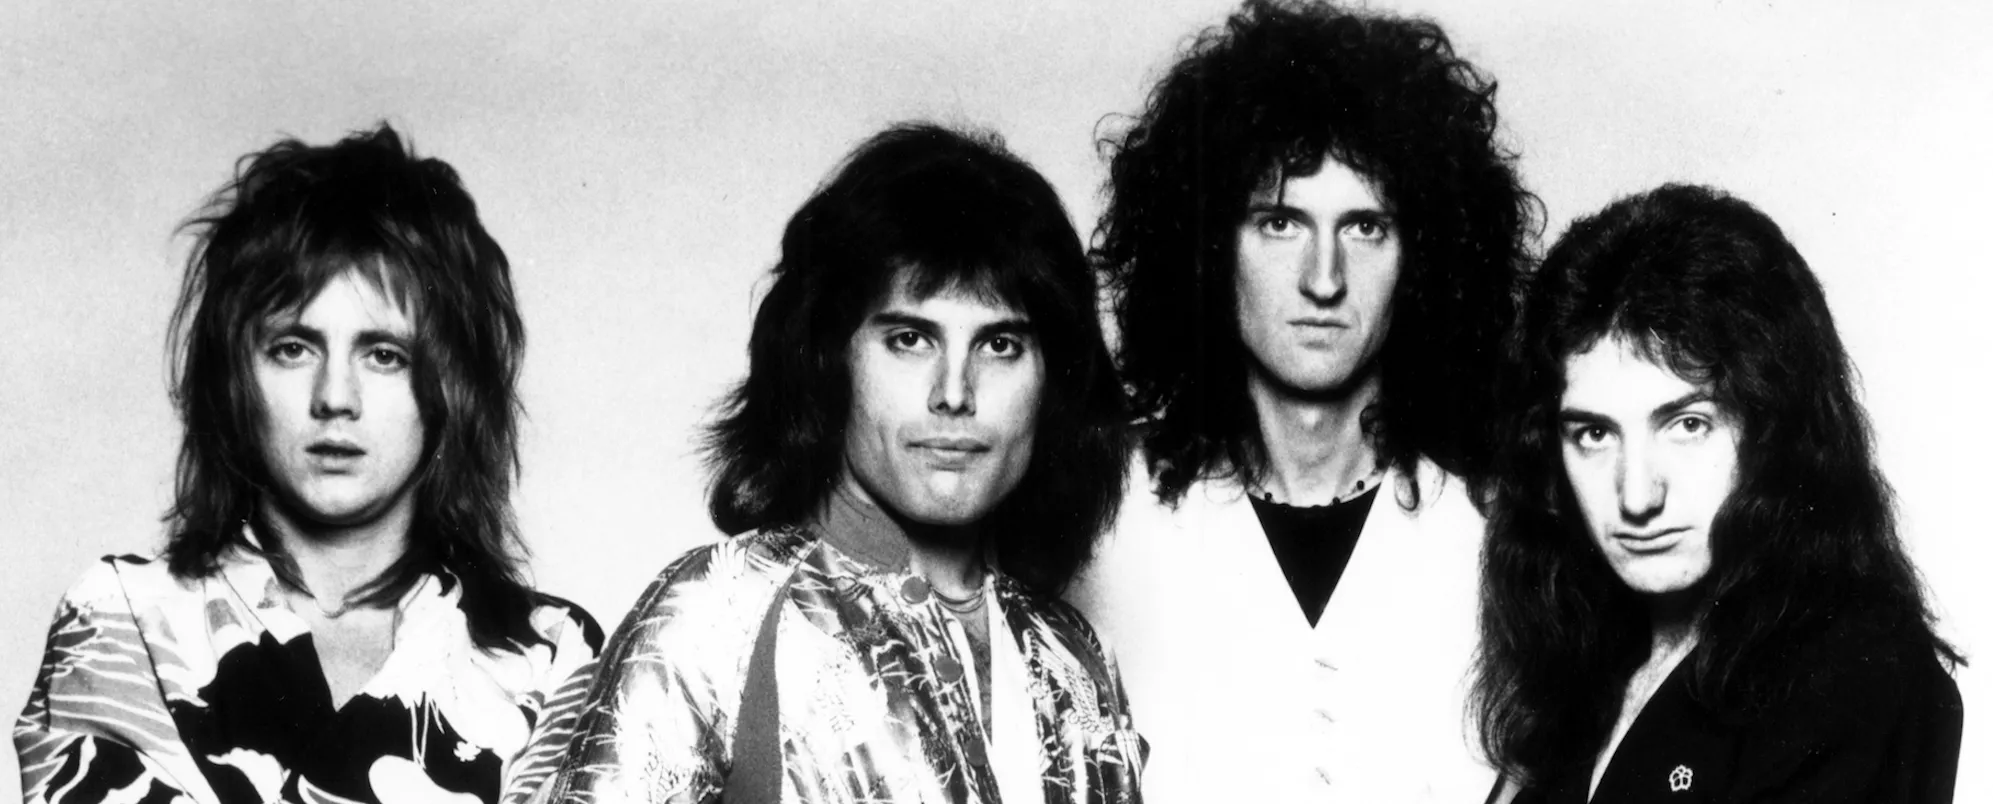 On This Day: Queen Scored Their First No. 1 Album with ‘A Night at the Opera’